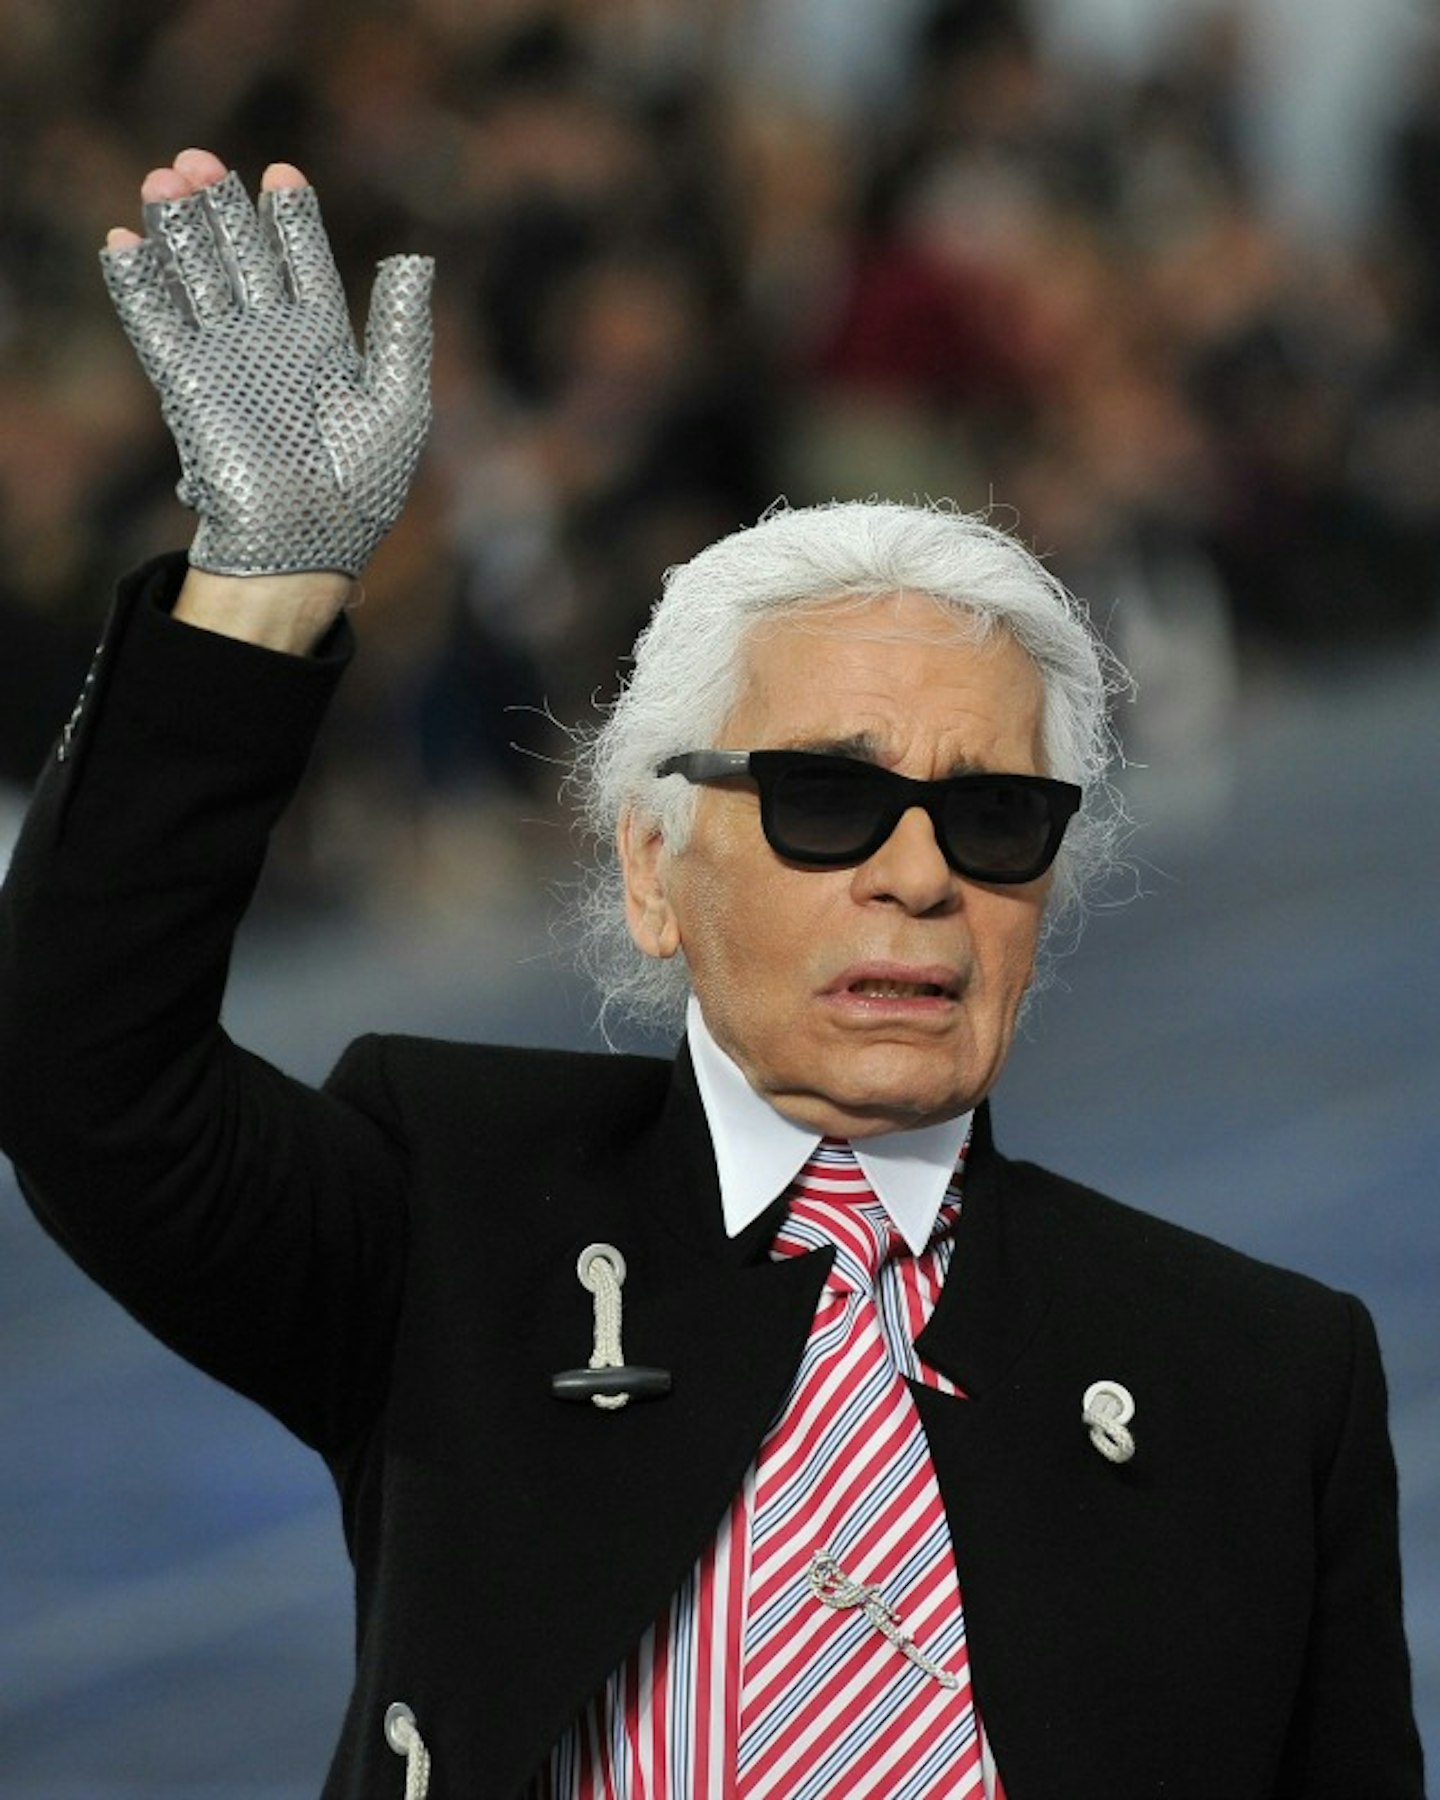 Karl Lagerfeld Best Quotes - 9 Quotes from Karl Lagerfeld, Iconic Designer  for Chanel and Fendi